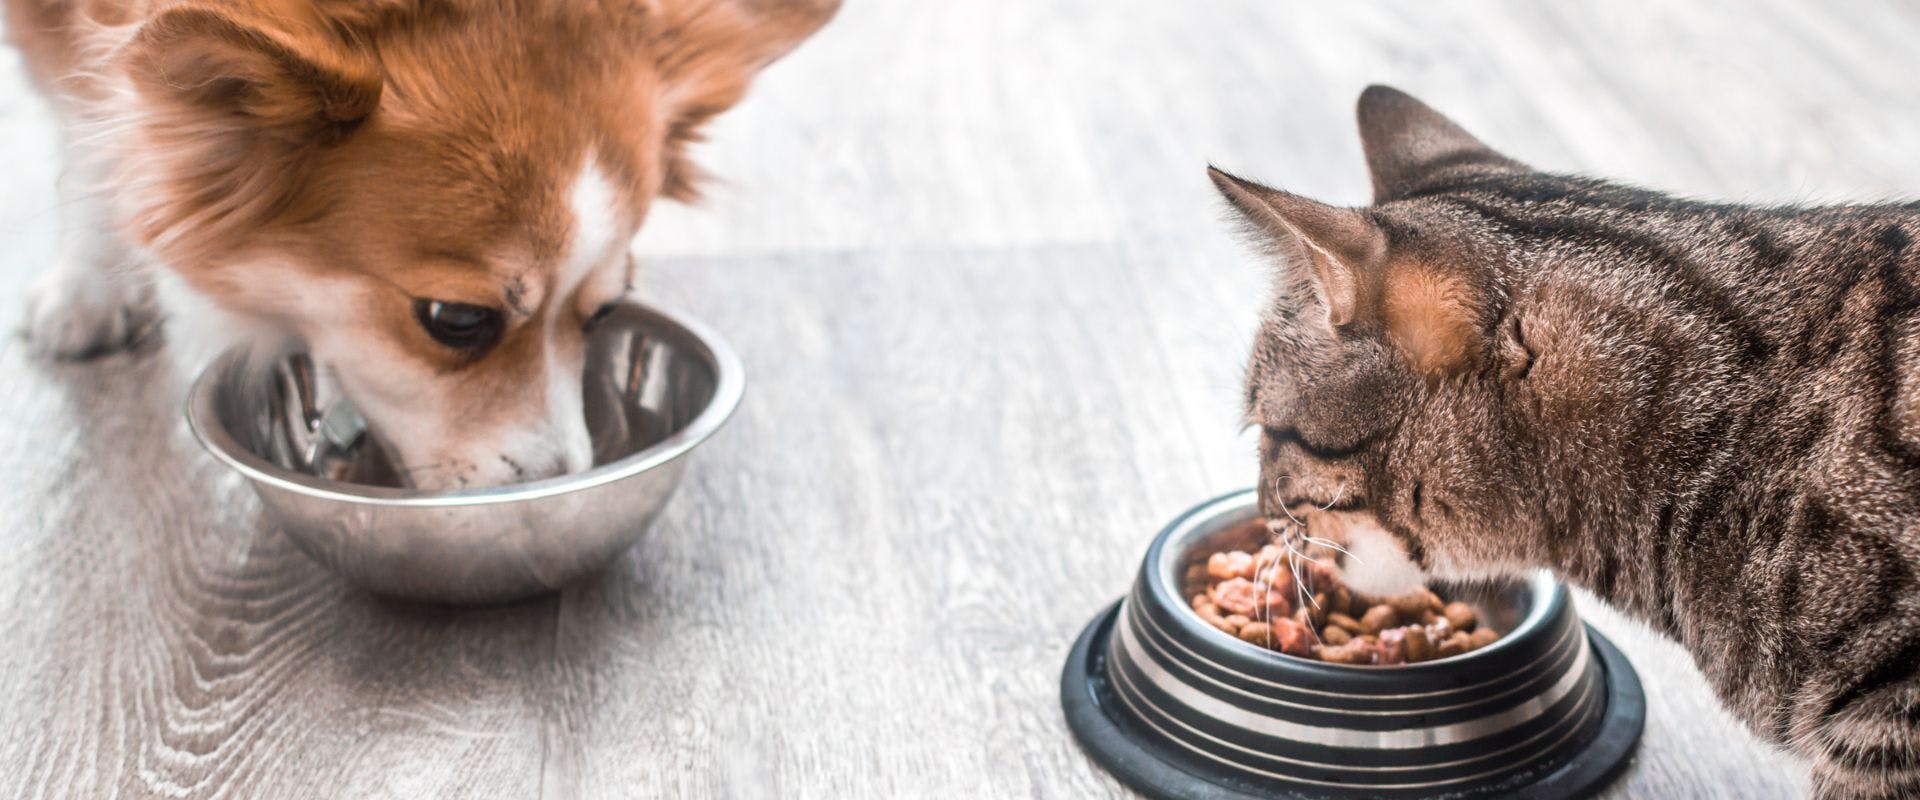 Dog and cat eating from separate bowls